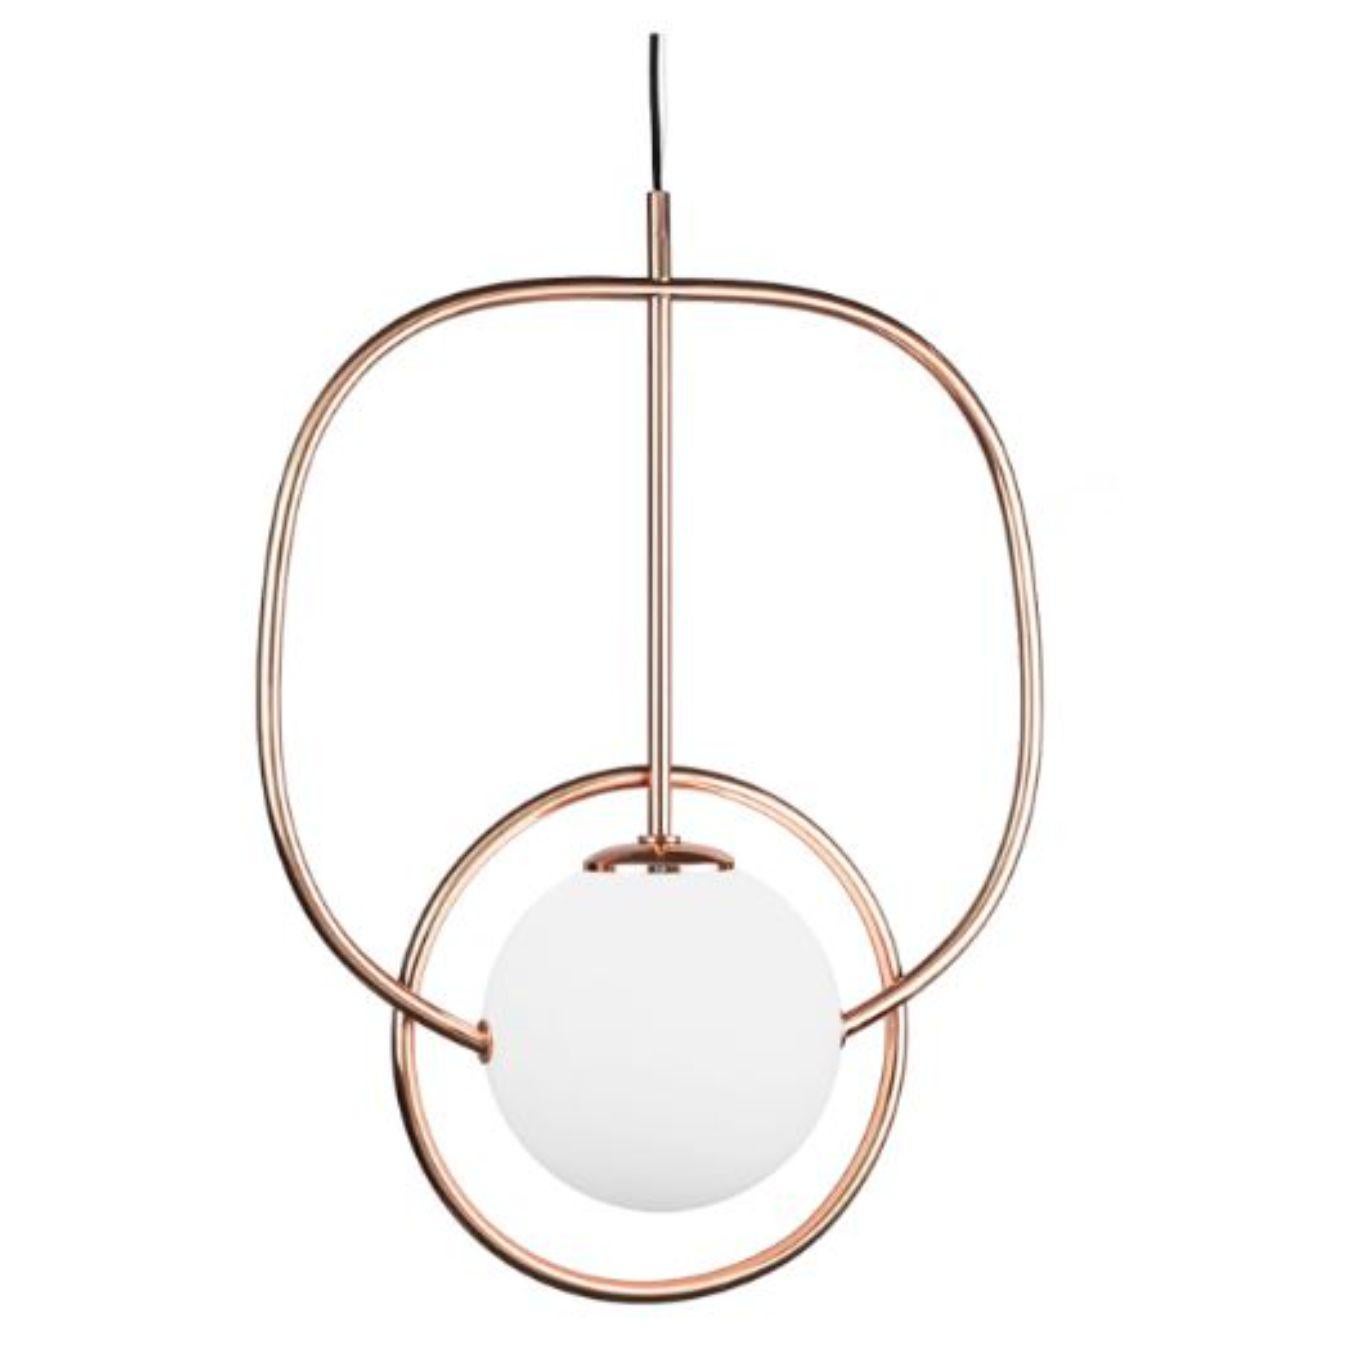 Brass Loop Suspension Lamp by Dooq
Dimensions: W 55 x D 25 x H 77 cm
Materials: lacquered metal, polished or brushed metal, brass.
Also available in different colours and materials. 

Information:
230V/50Hz
1 x max. G9
4W LED

120V/60Hz
1 x max.